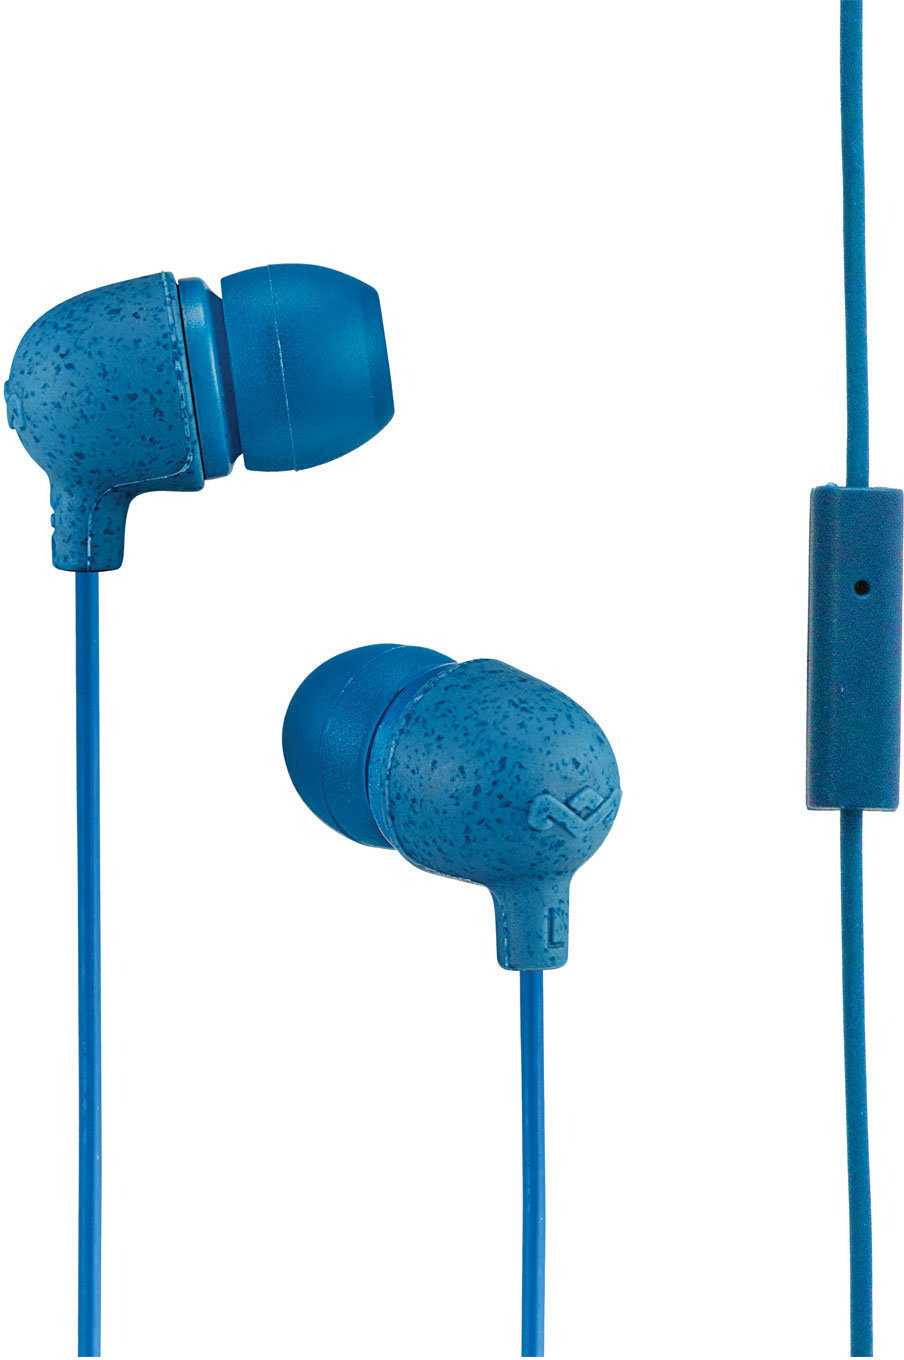 Ecouteurs intra-auriculaires House of Marley Little Bird Navy